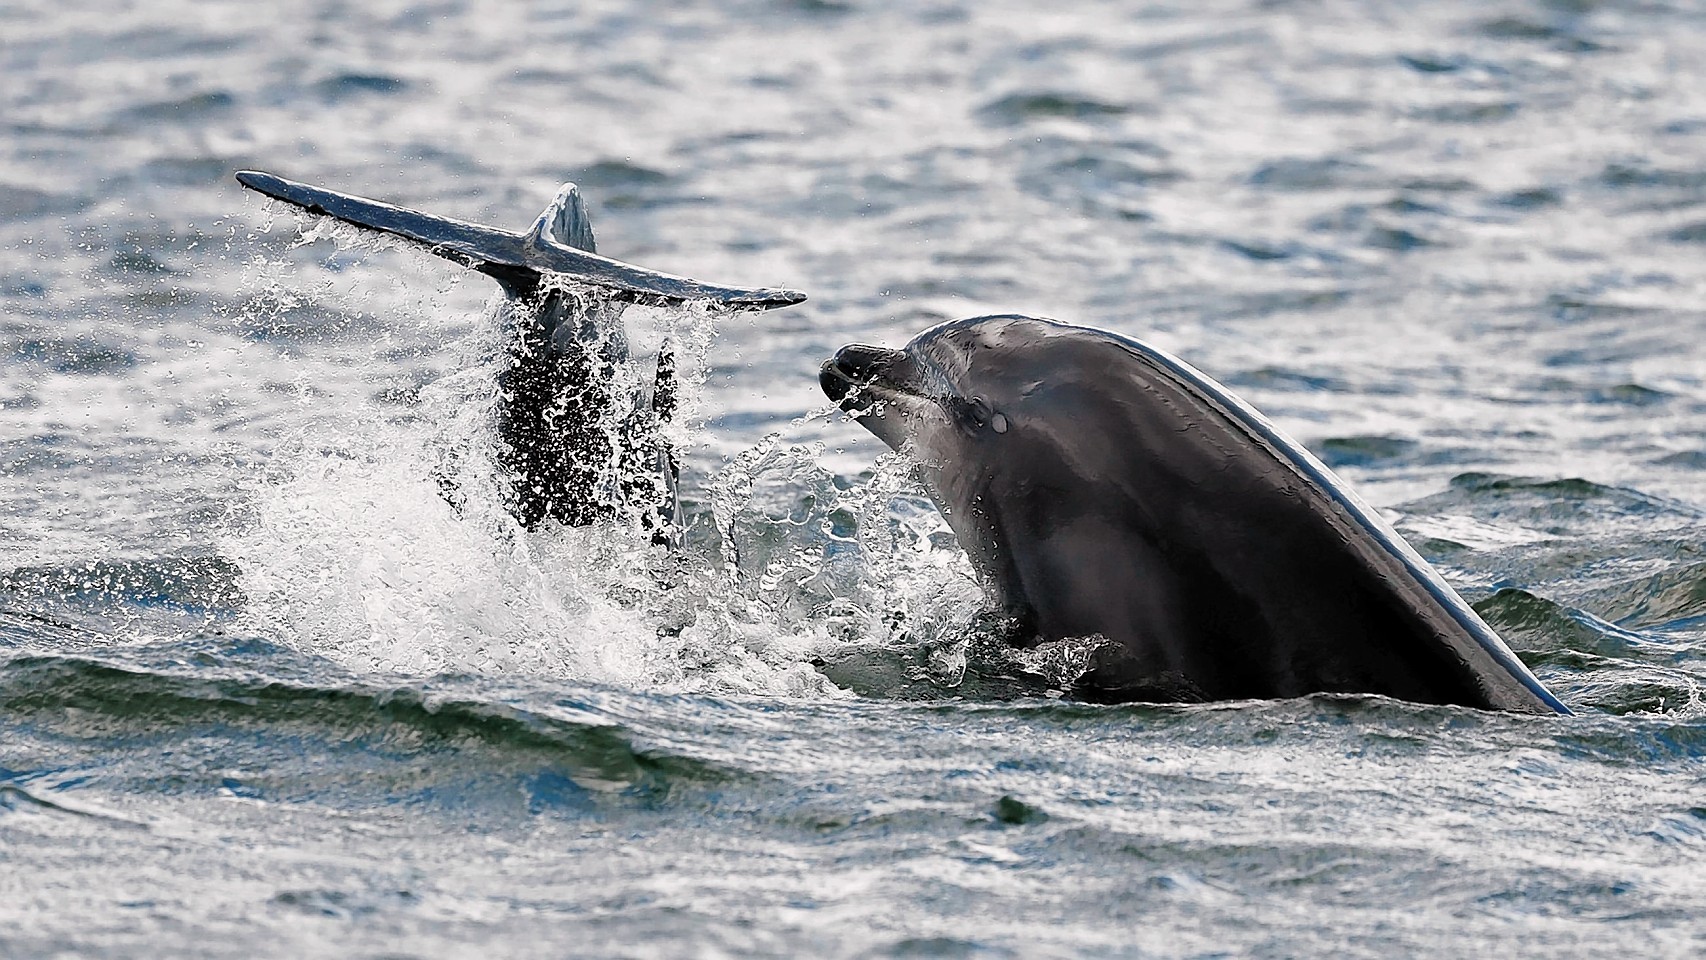 Dolphins living in the north of Scotland have been snapped frolicking in the sea